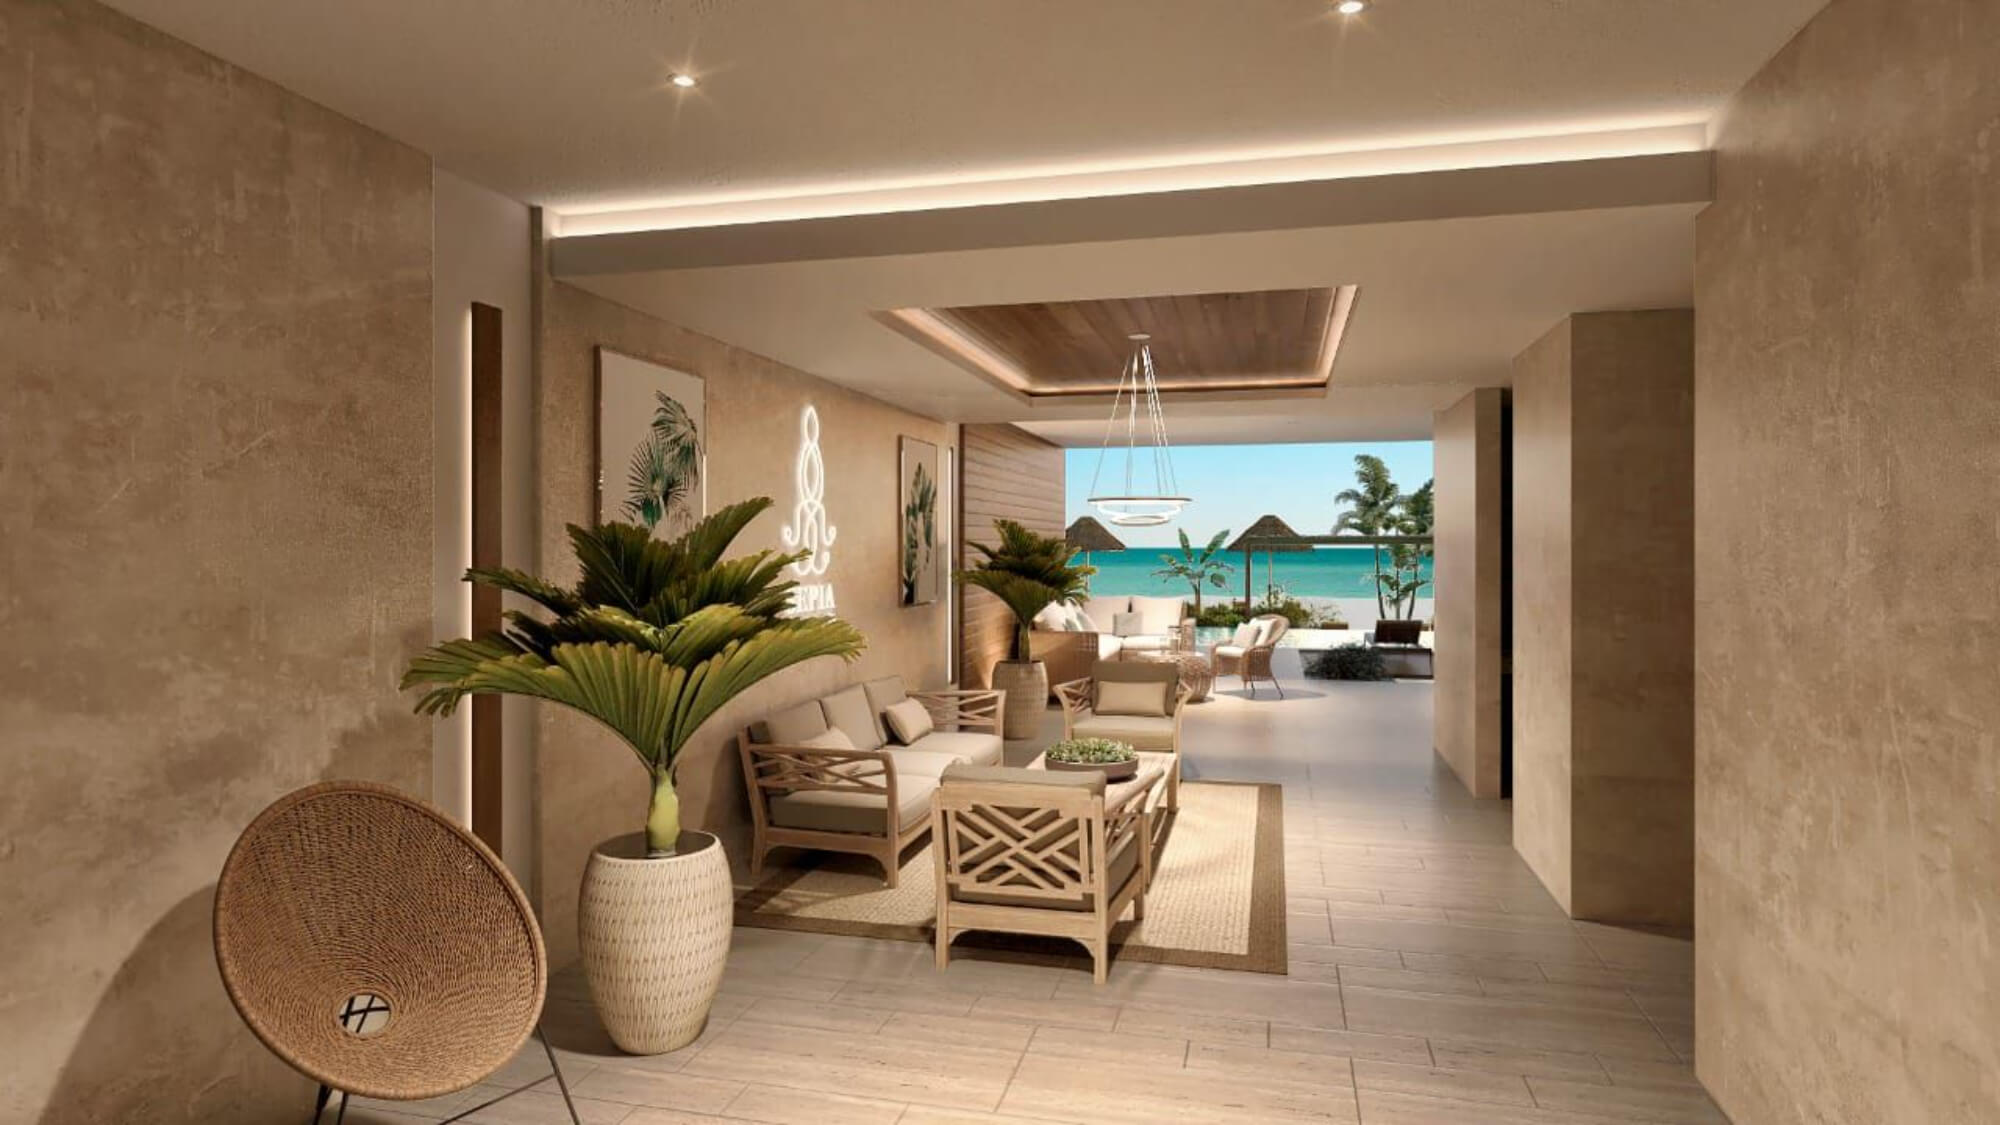 Large condo with garden, 258 m2, concierge &amp; driver, clubhousewith exclusive amenities, pre-construction for sale in Merida.